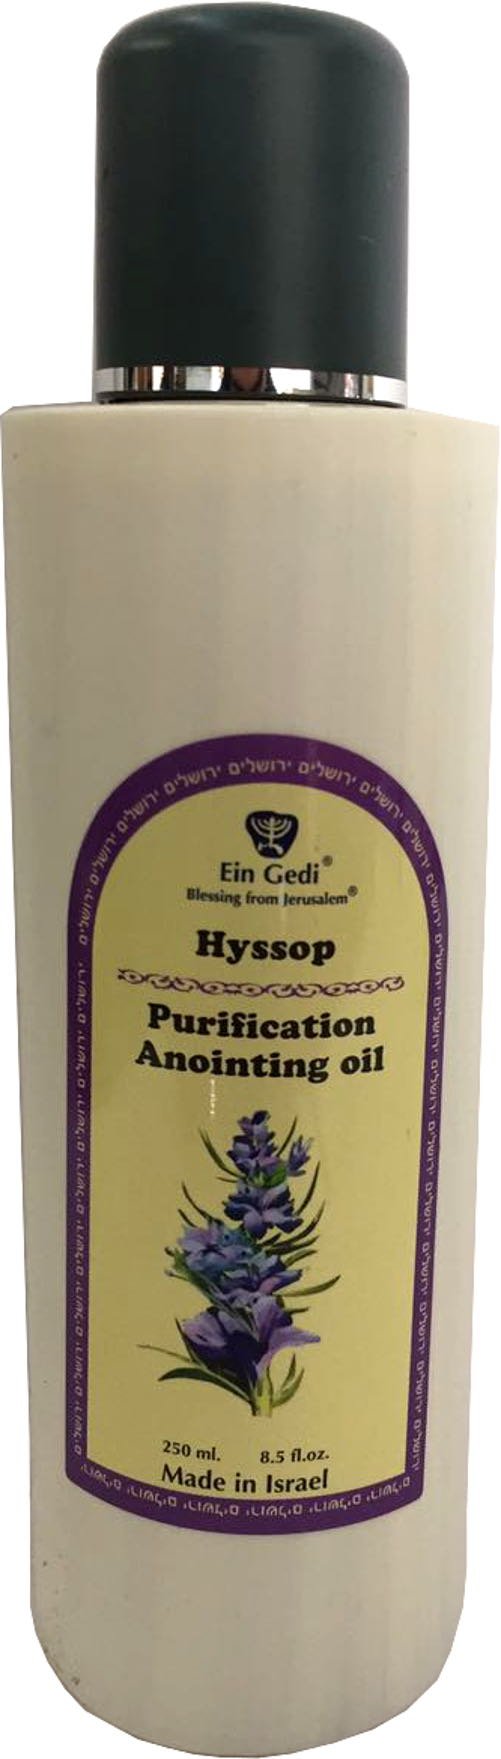 Holy Land Market Henna anointing Oil from Ein Gedi large size - Anointing oil - 250 ml (8.5 fl. oz.)